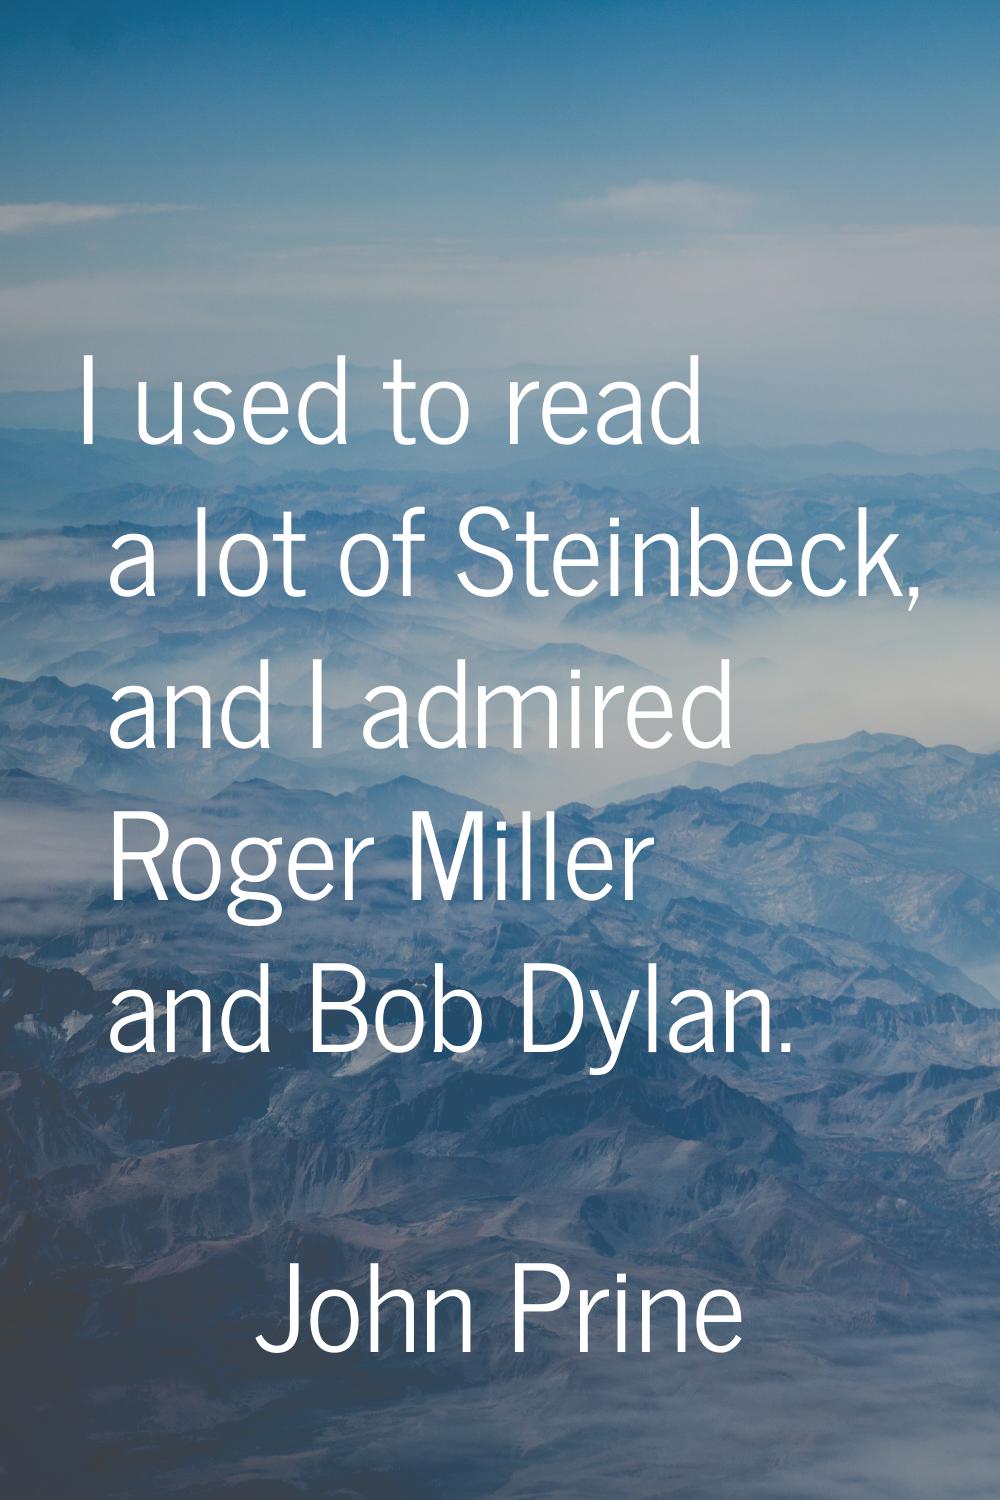 I used to read a lot of Steinbeck, and I admired Roger Miller and Bob Dylan.